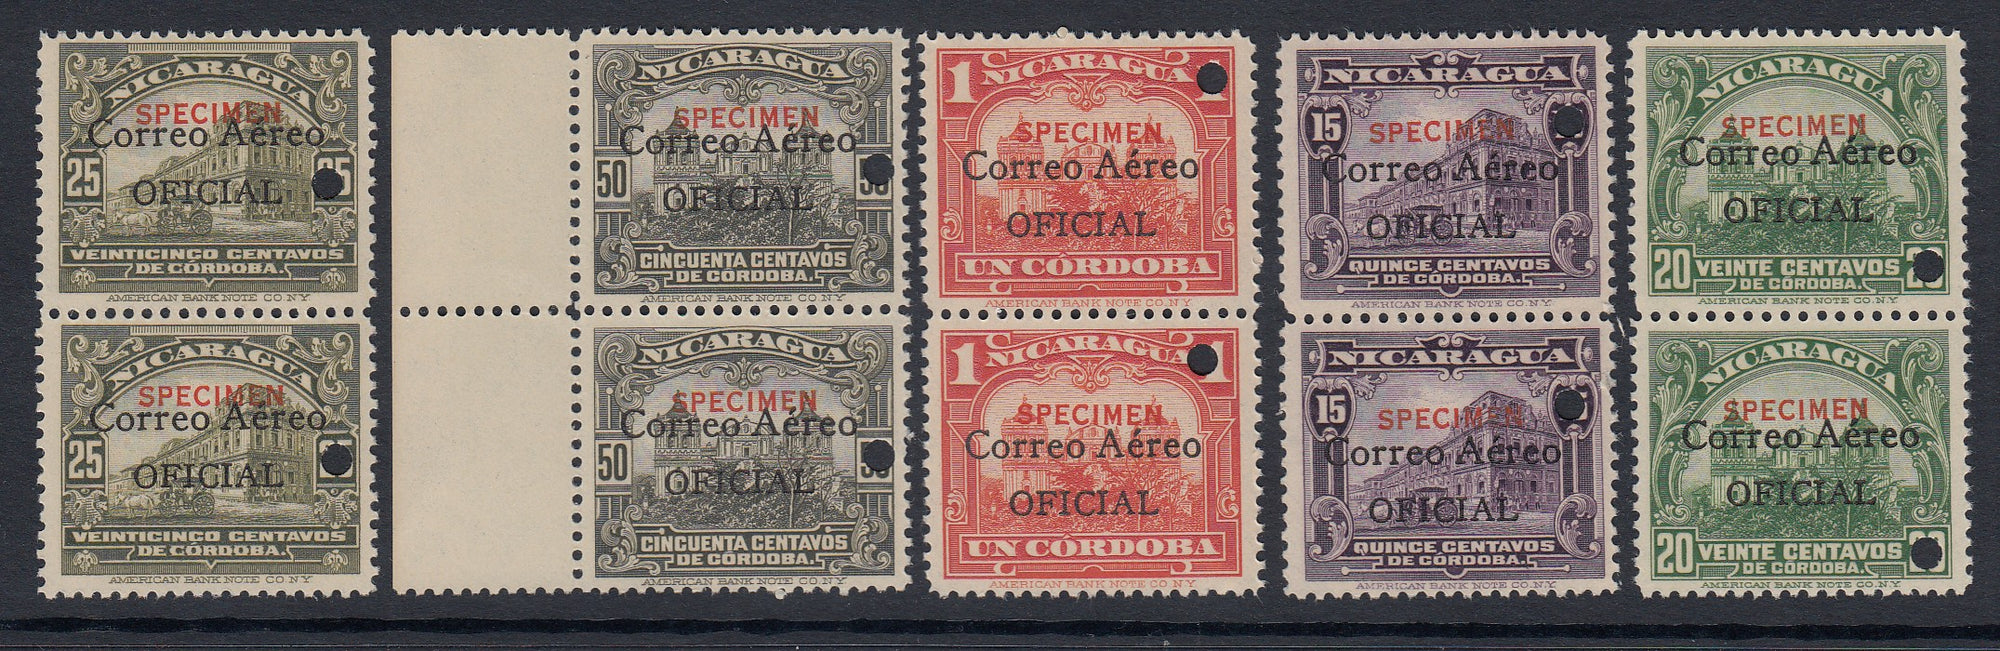 Nicaragua 1933 Airmail Officials Specimen Complete Set in Pairs MNH. Scott CO10-CO14